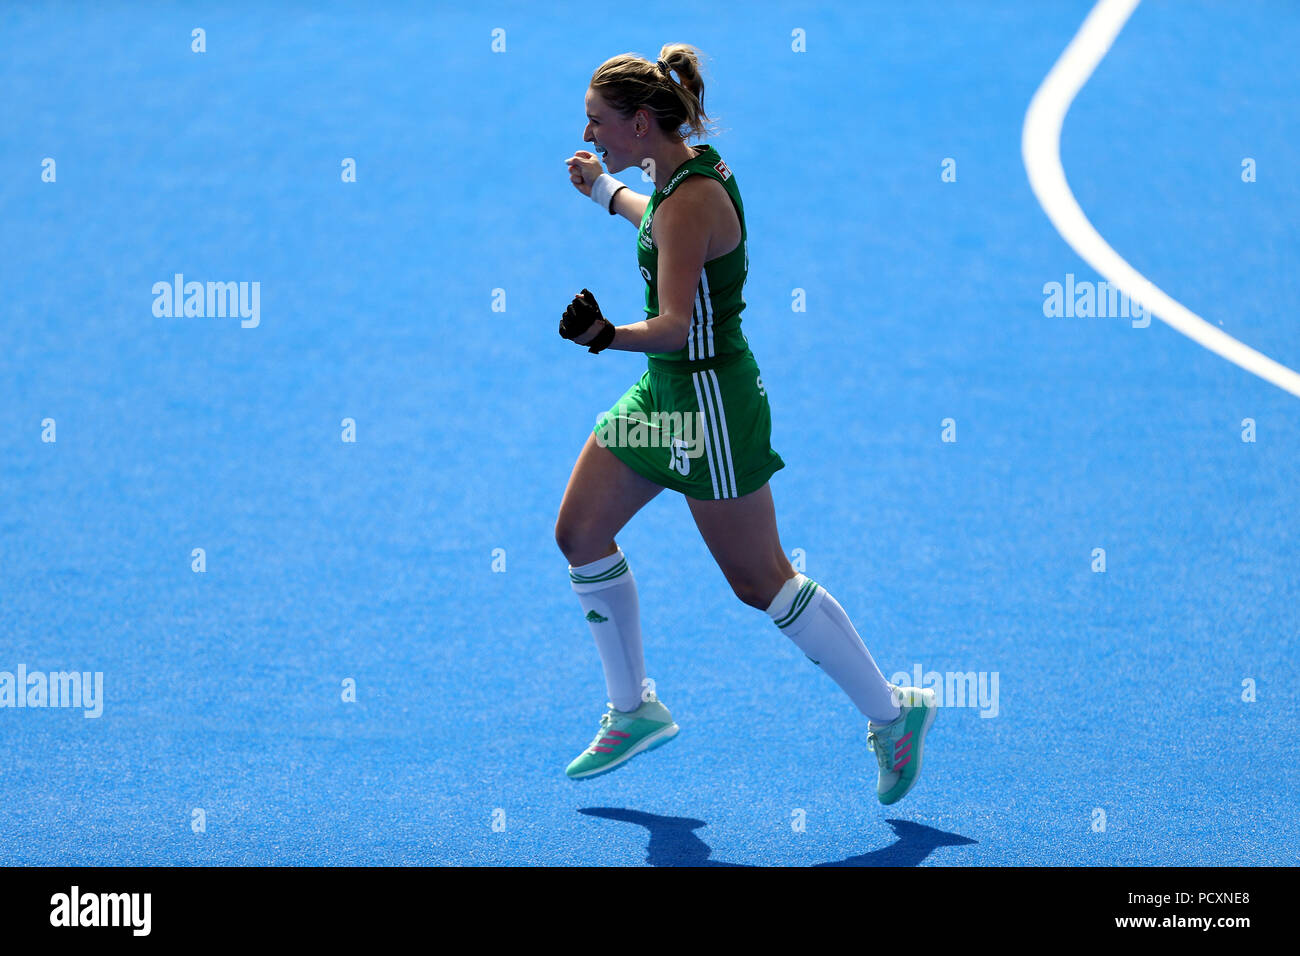 Ireland's Gillian Pinder celebrates scoring the winning goal in sudden death of the shootout to win the match during the Vitality Women's Hockey World Cup Semi Final match at The Lee Valley Hockey and Tennis Centre, London. PRESS ASSOCIATION Photo, Picture date: Saturday August 4, 2018. Photo credit should read: Steven Paston/PA Wire Stock Photo